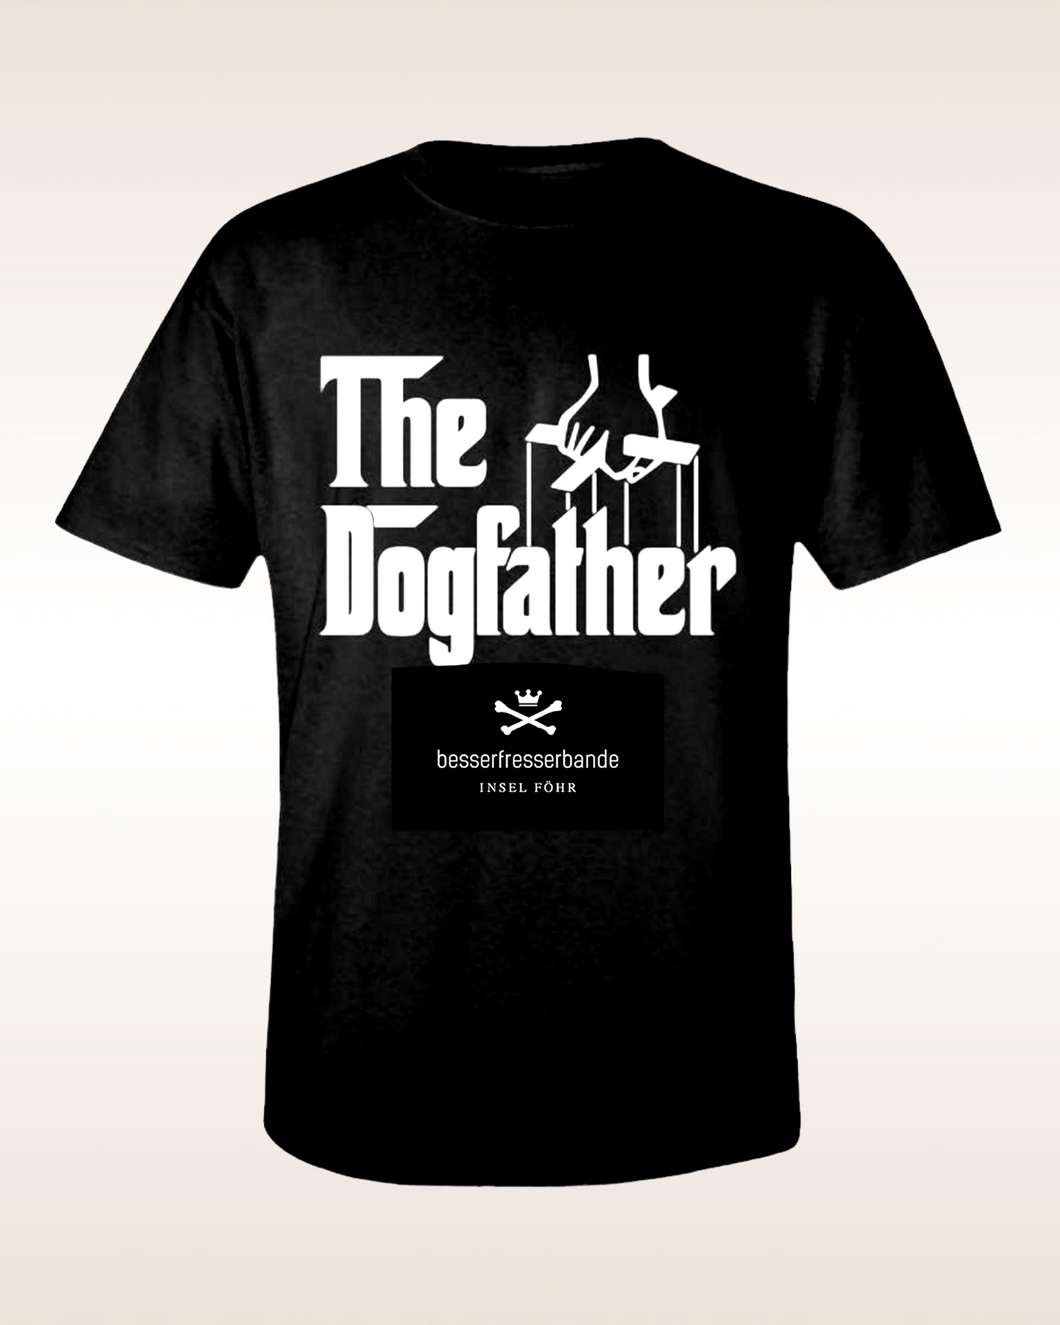 'THE DOGFATHER' Shirt